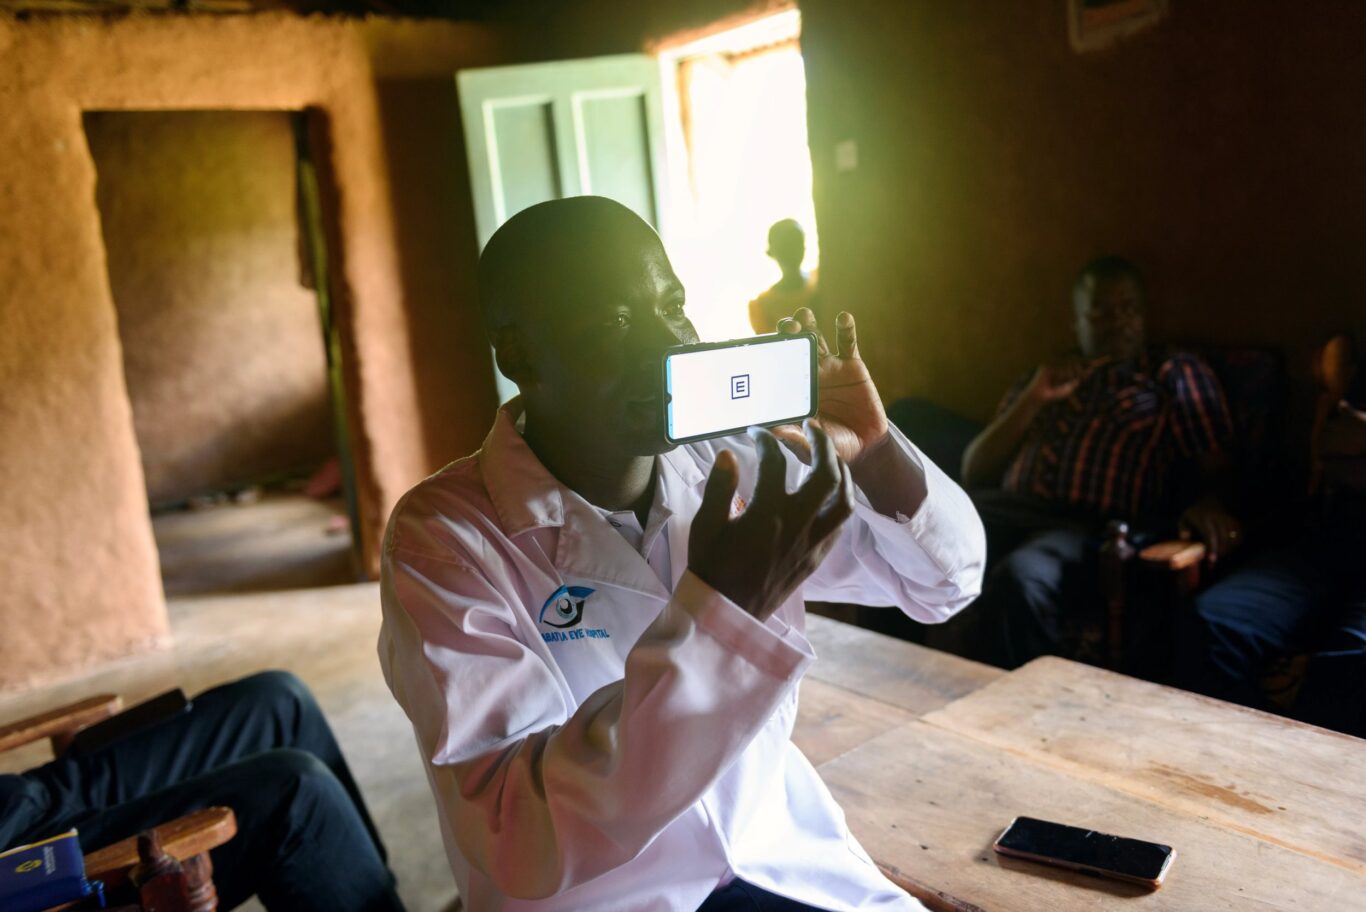 A community health assistant sits inside a home in Kenya conducting a vision screening. He holds up a phone displaying the Peek visual acuity test.